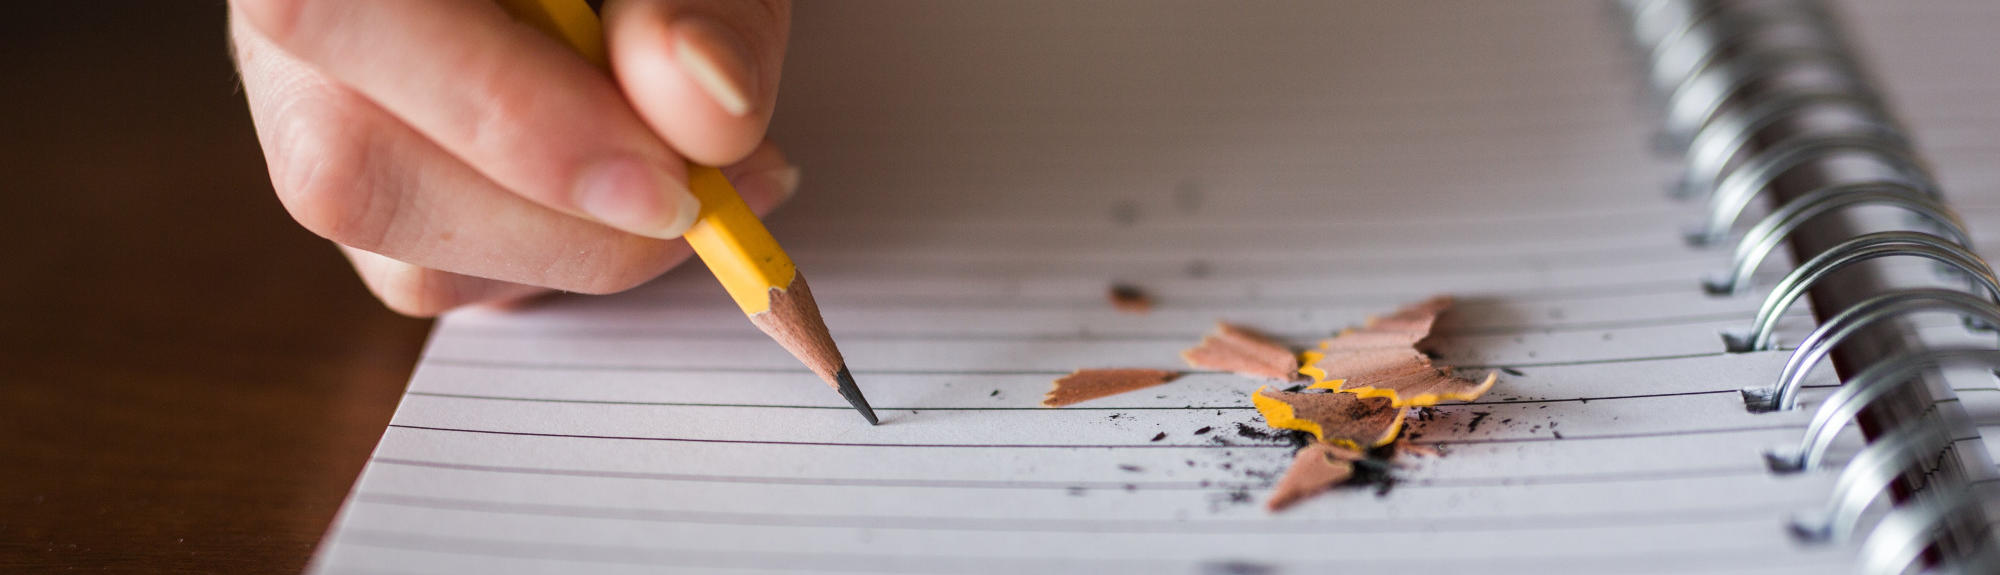 Pencil shavings lay on an open notebook, while a hand writes with a pencil